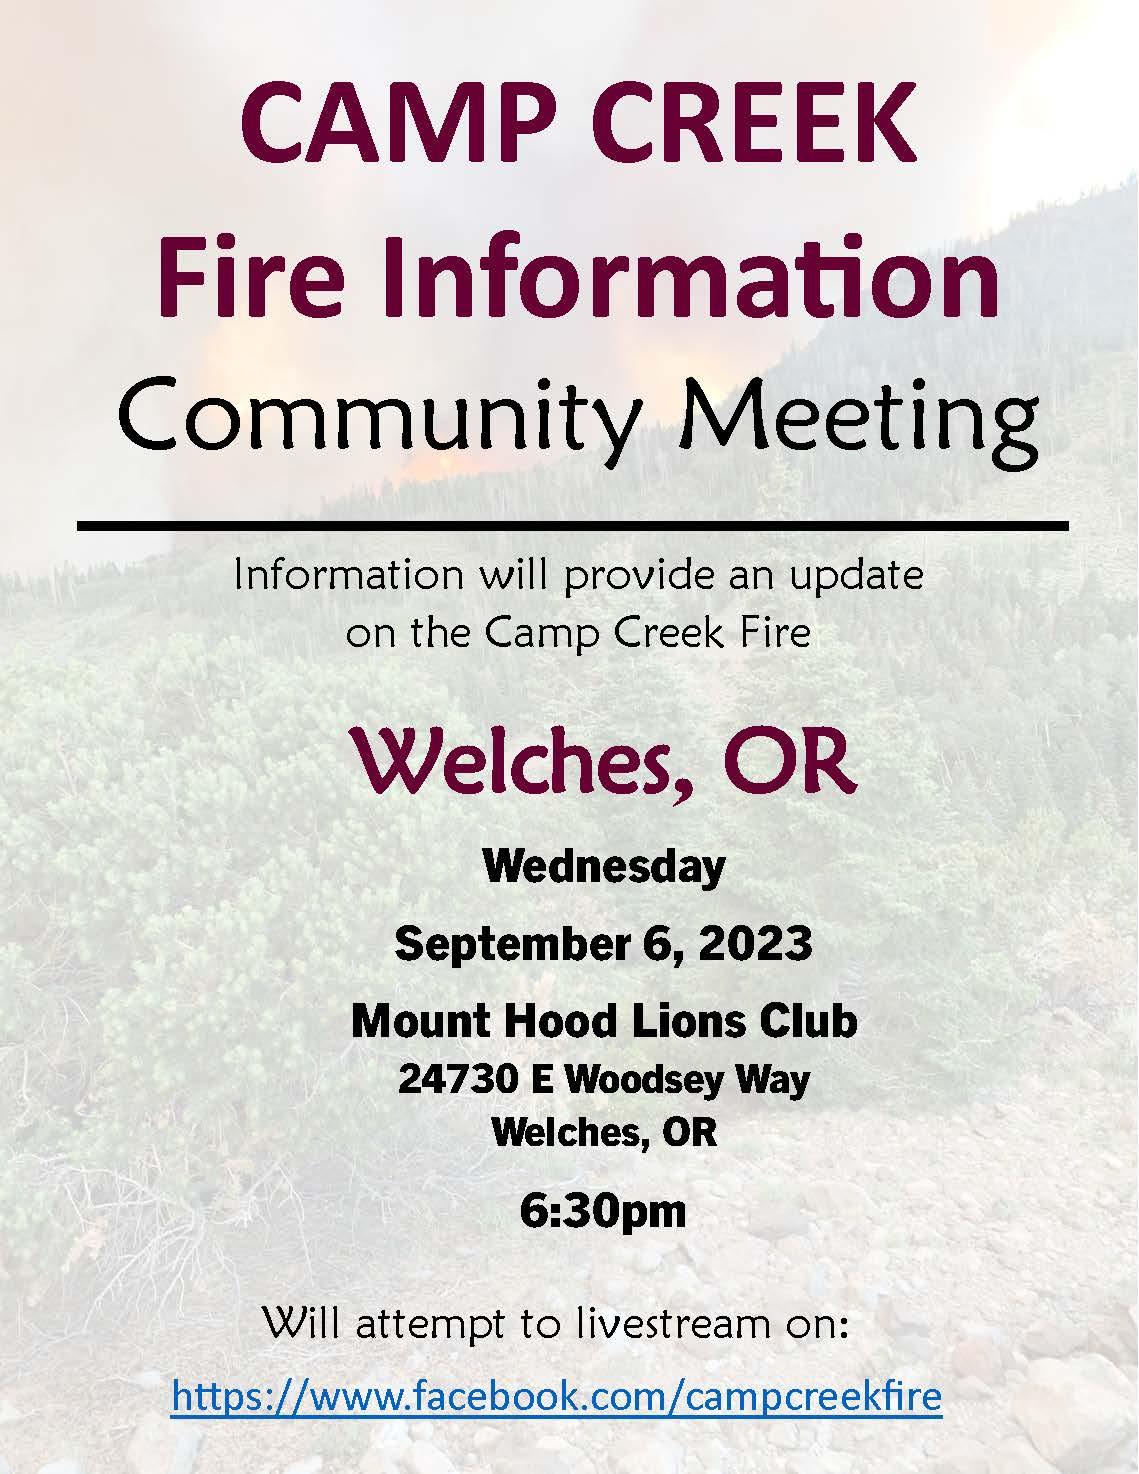 A graphic with detailed information about the upcoming community meeting in Welches, OR.